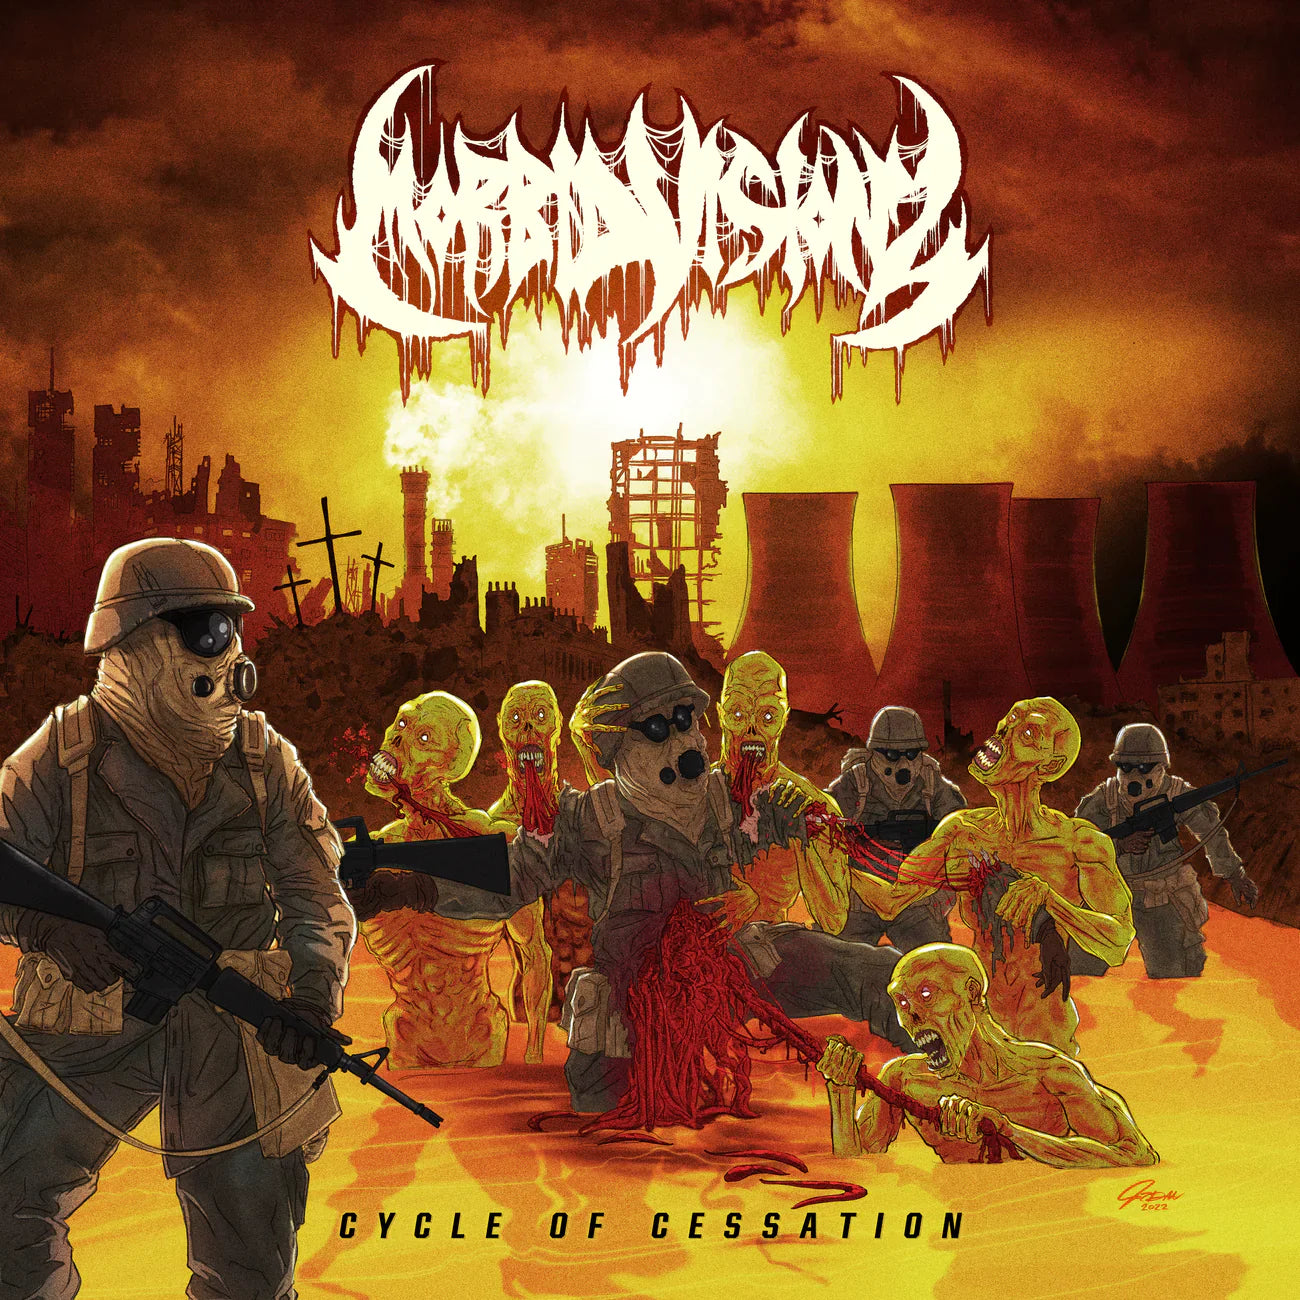 Morbid Visionz  "Cycle of Cessation" CD